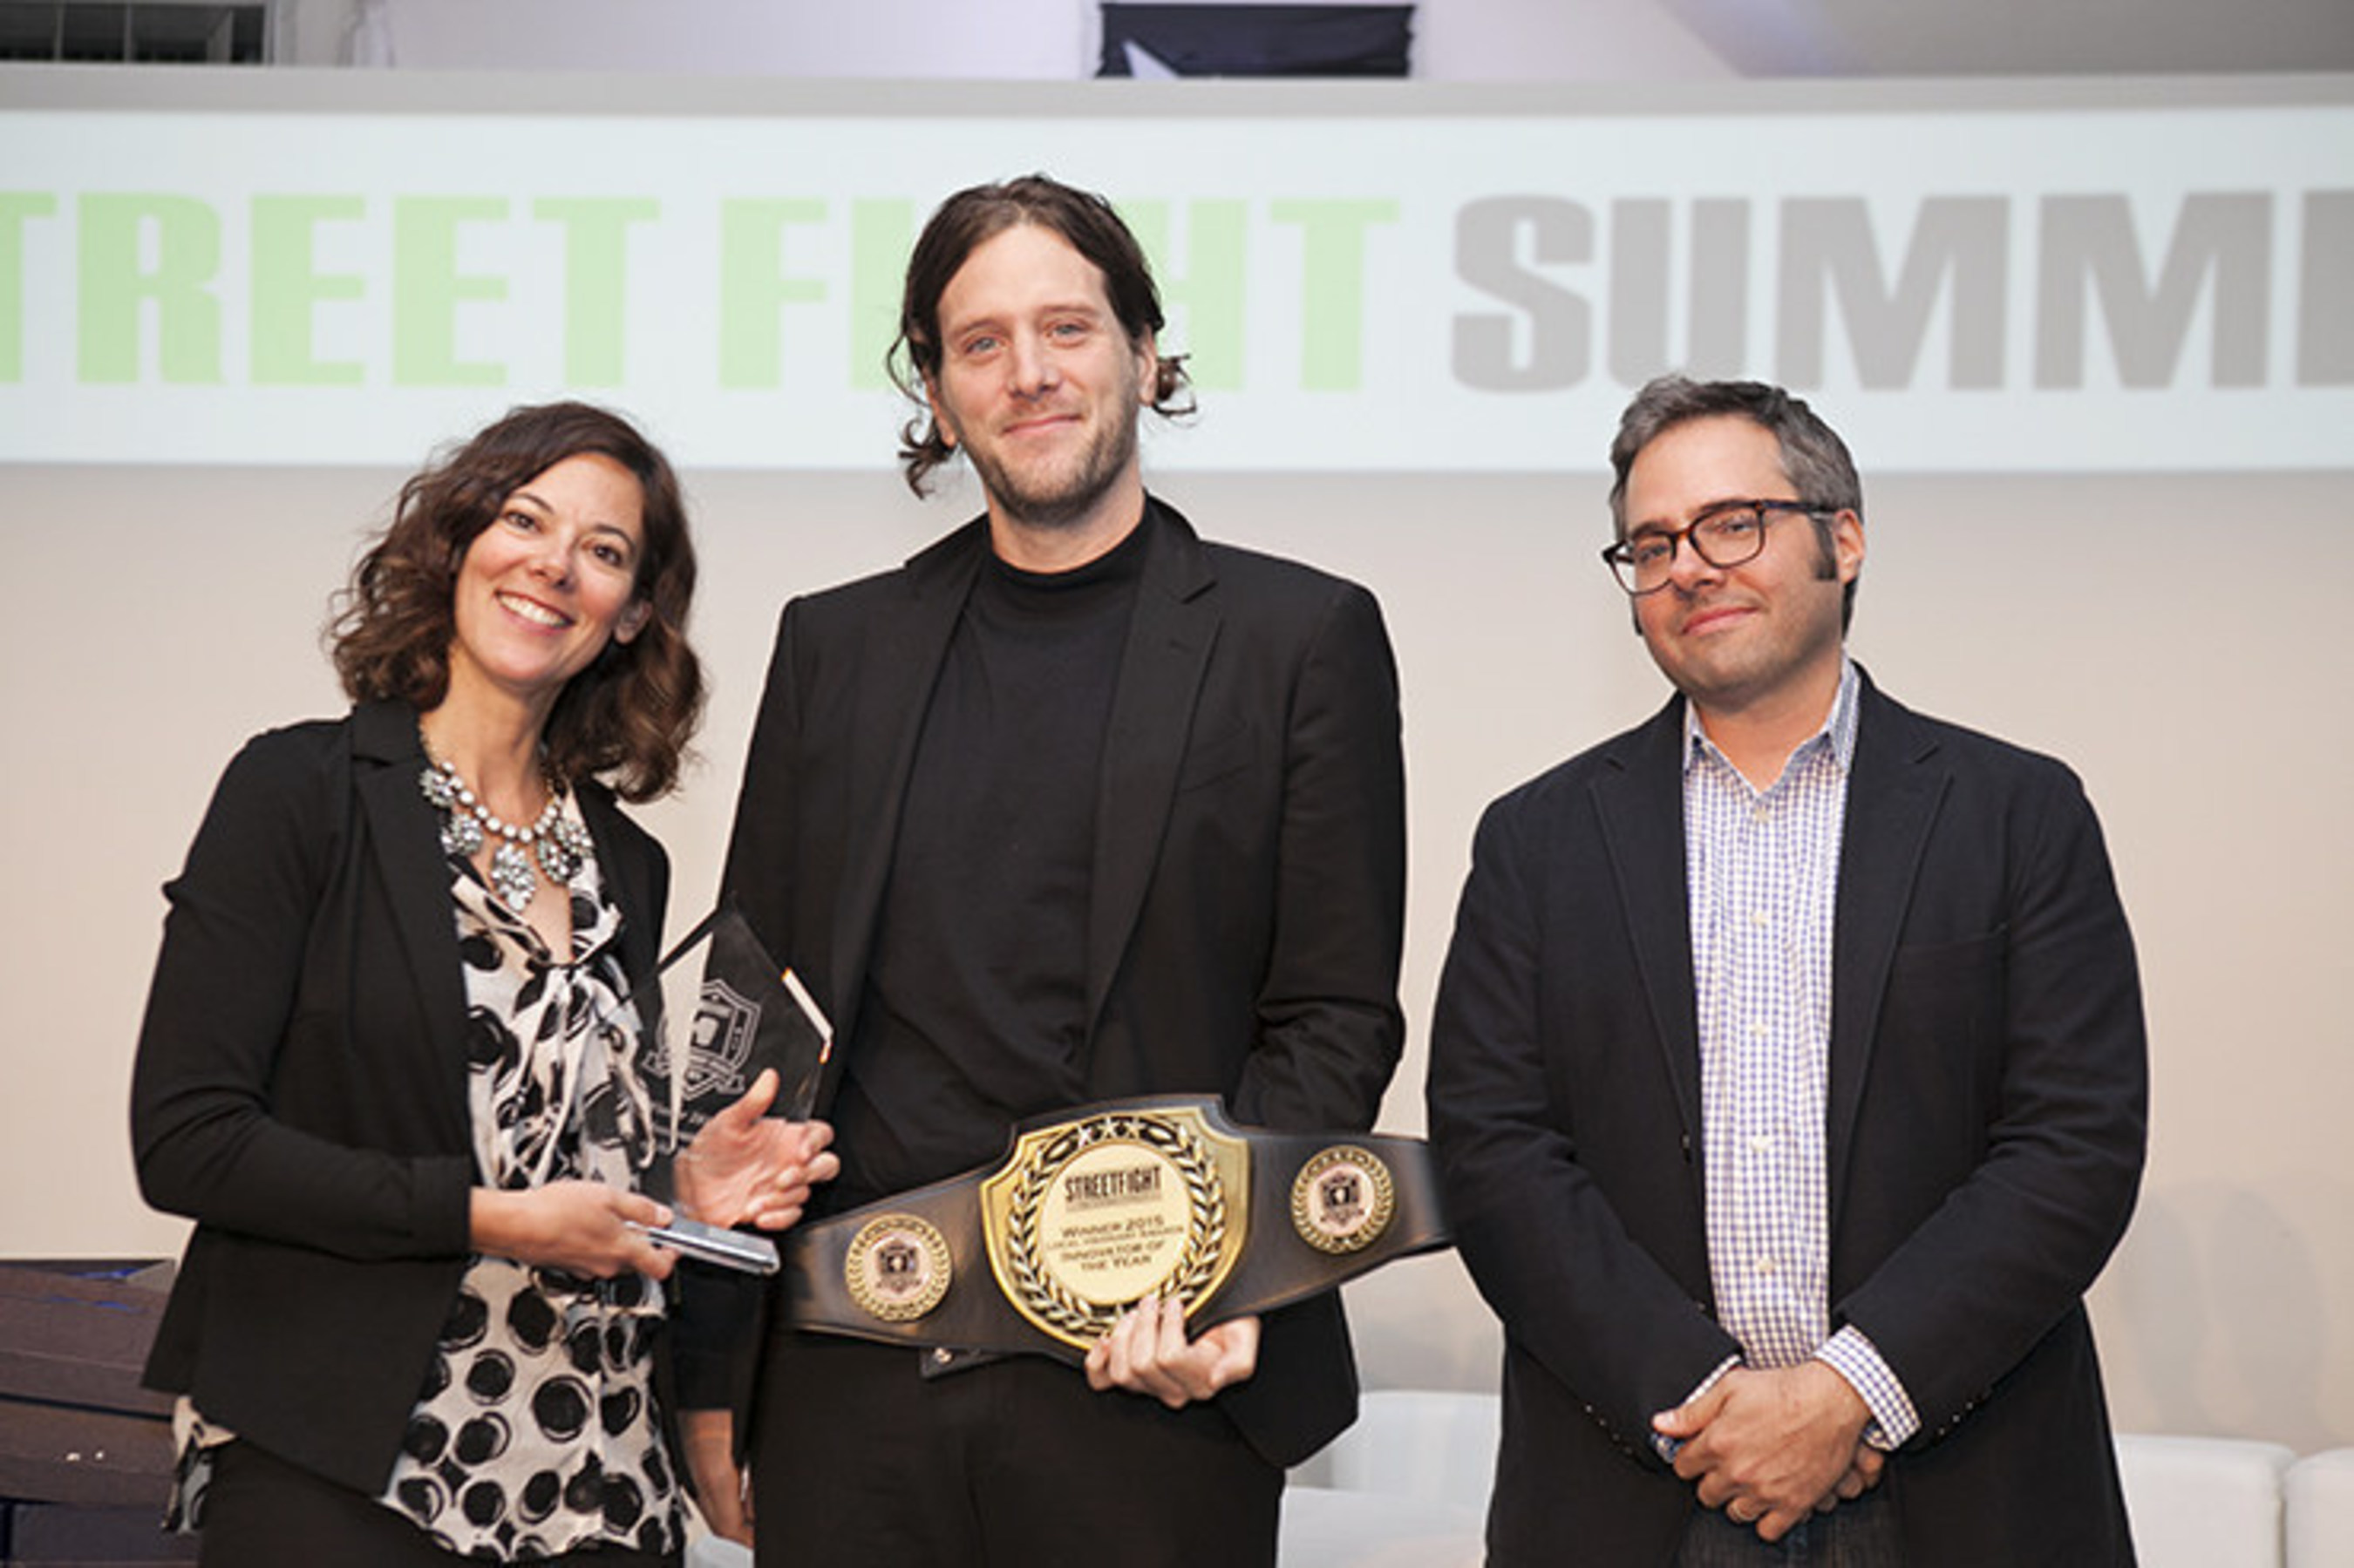 Yext CEO and Co-Founder Howard Lerman wins "Innovator of the Year" at Street Fight's Local Visionary Awards.